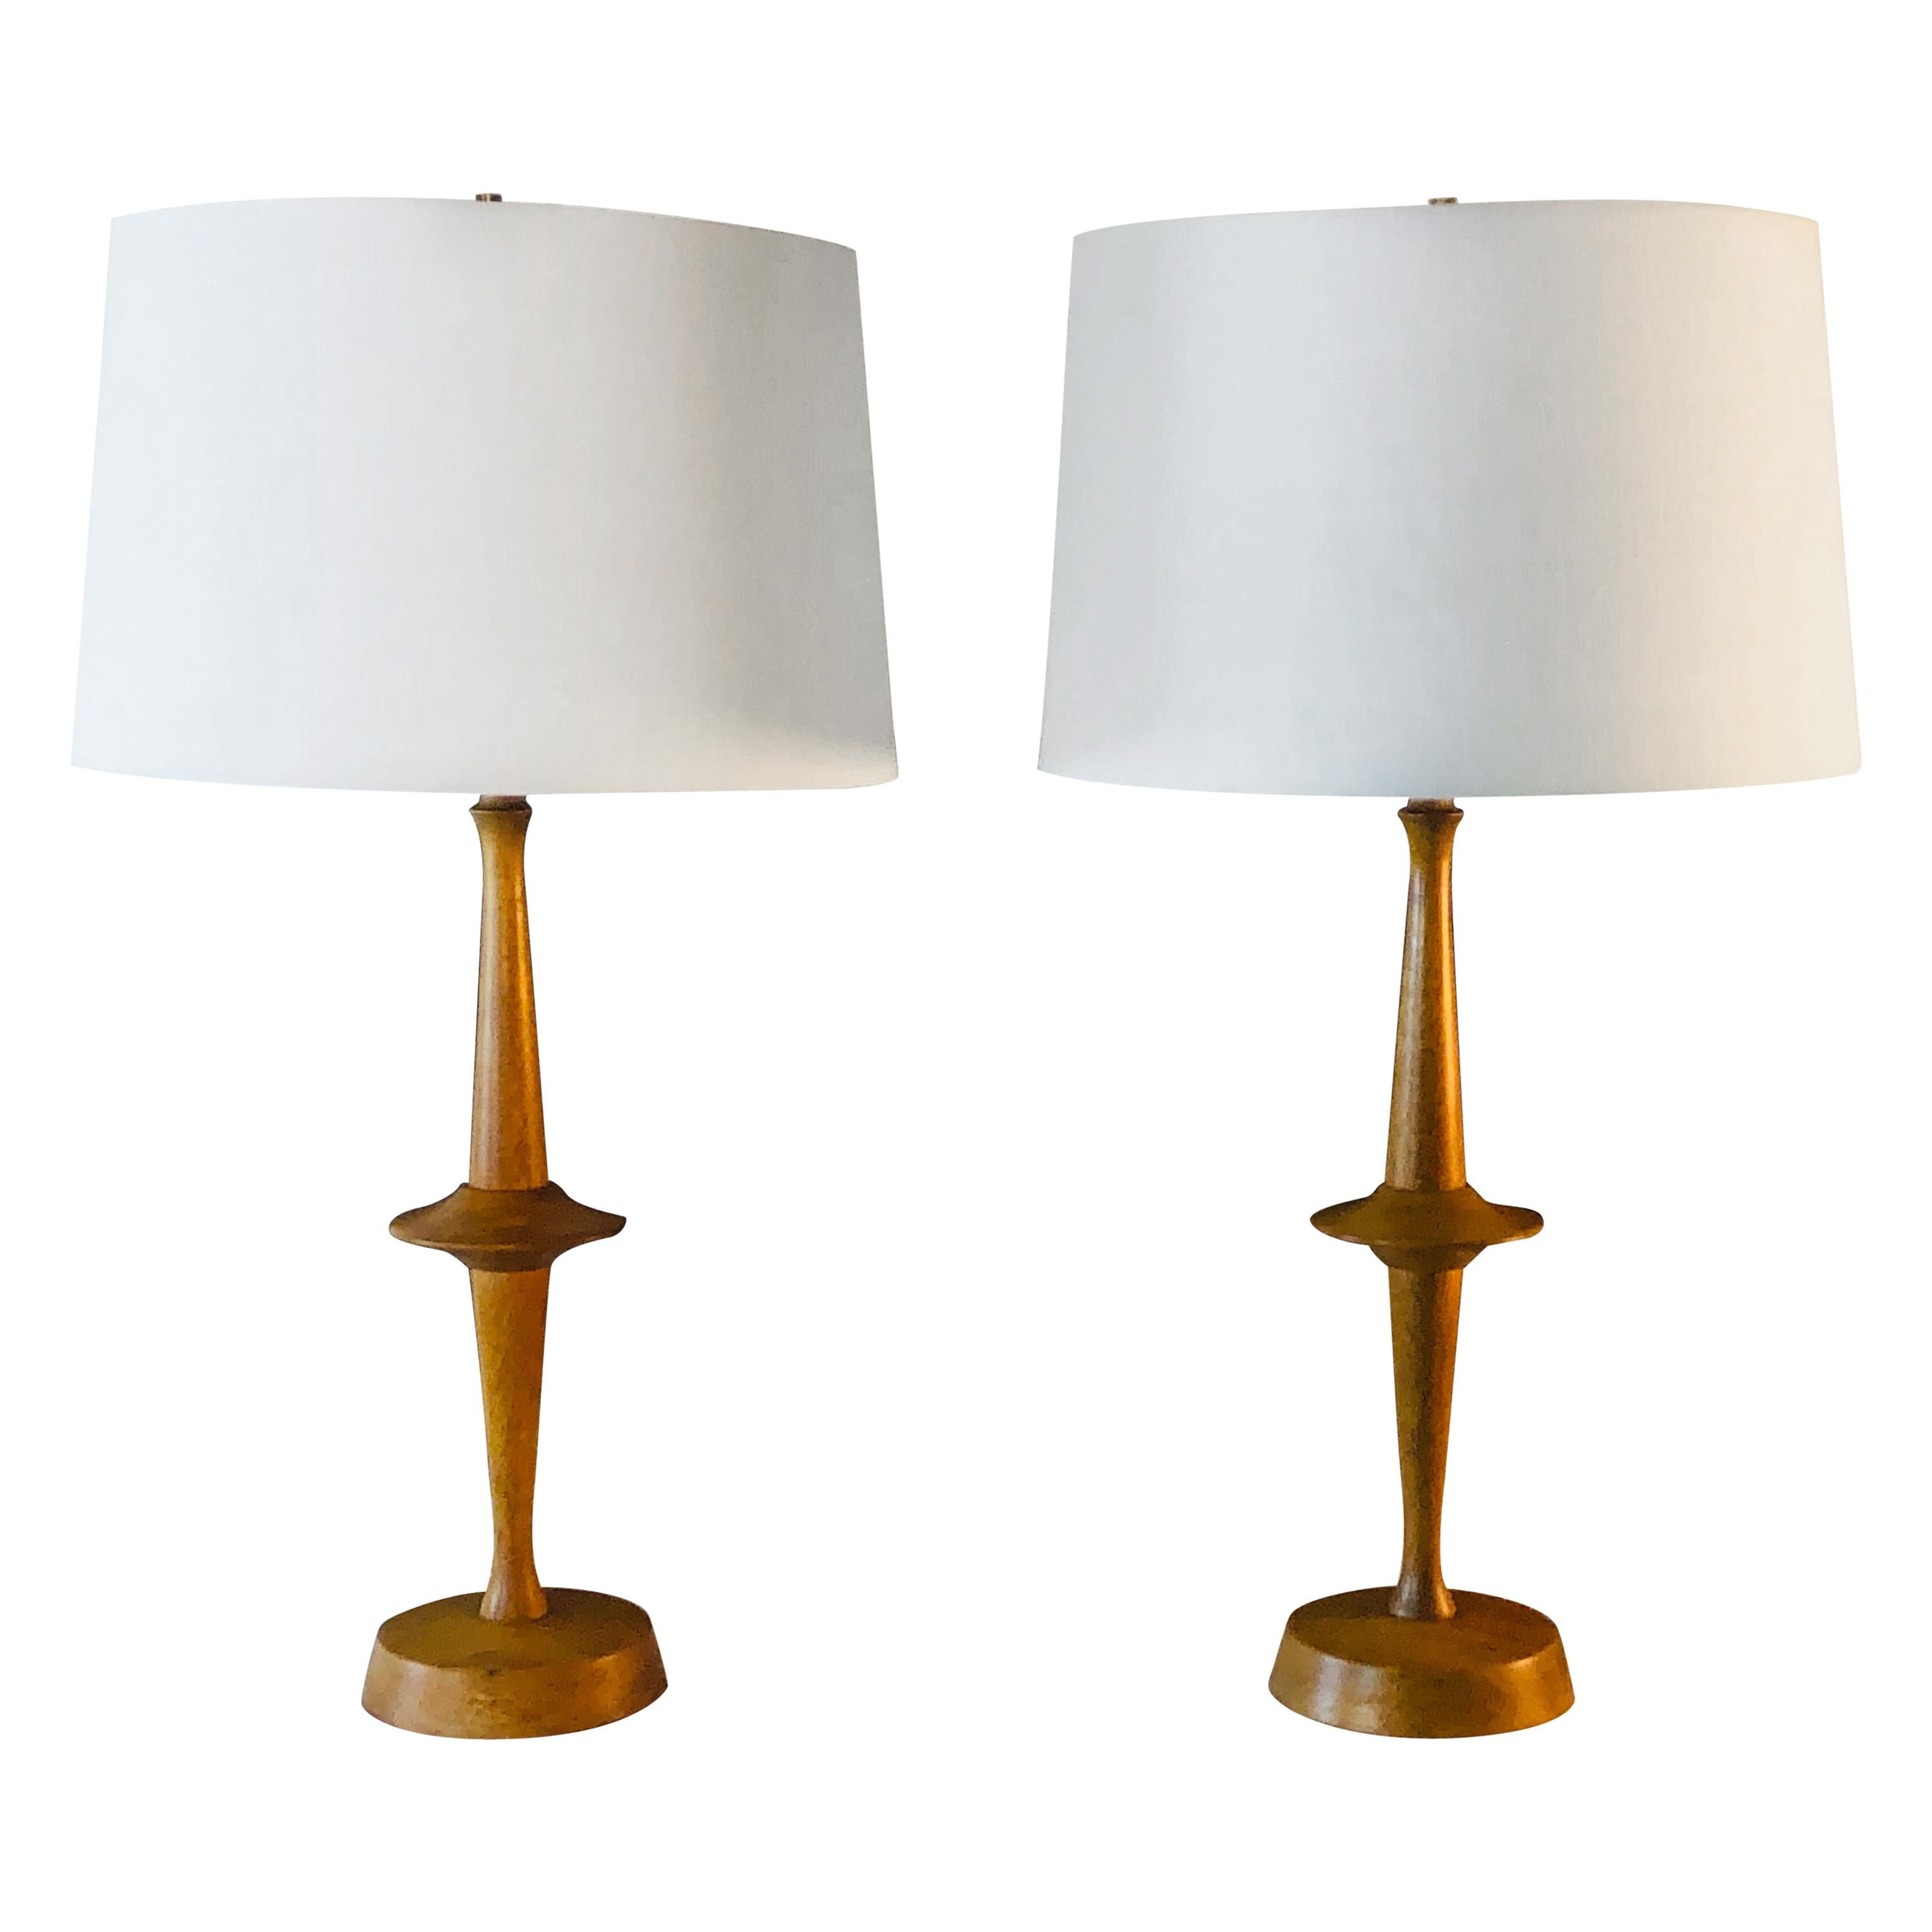 1950s Yasha Heifetz Atomic-Style Table Lamps, Pair For Sale